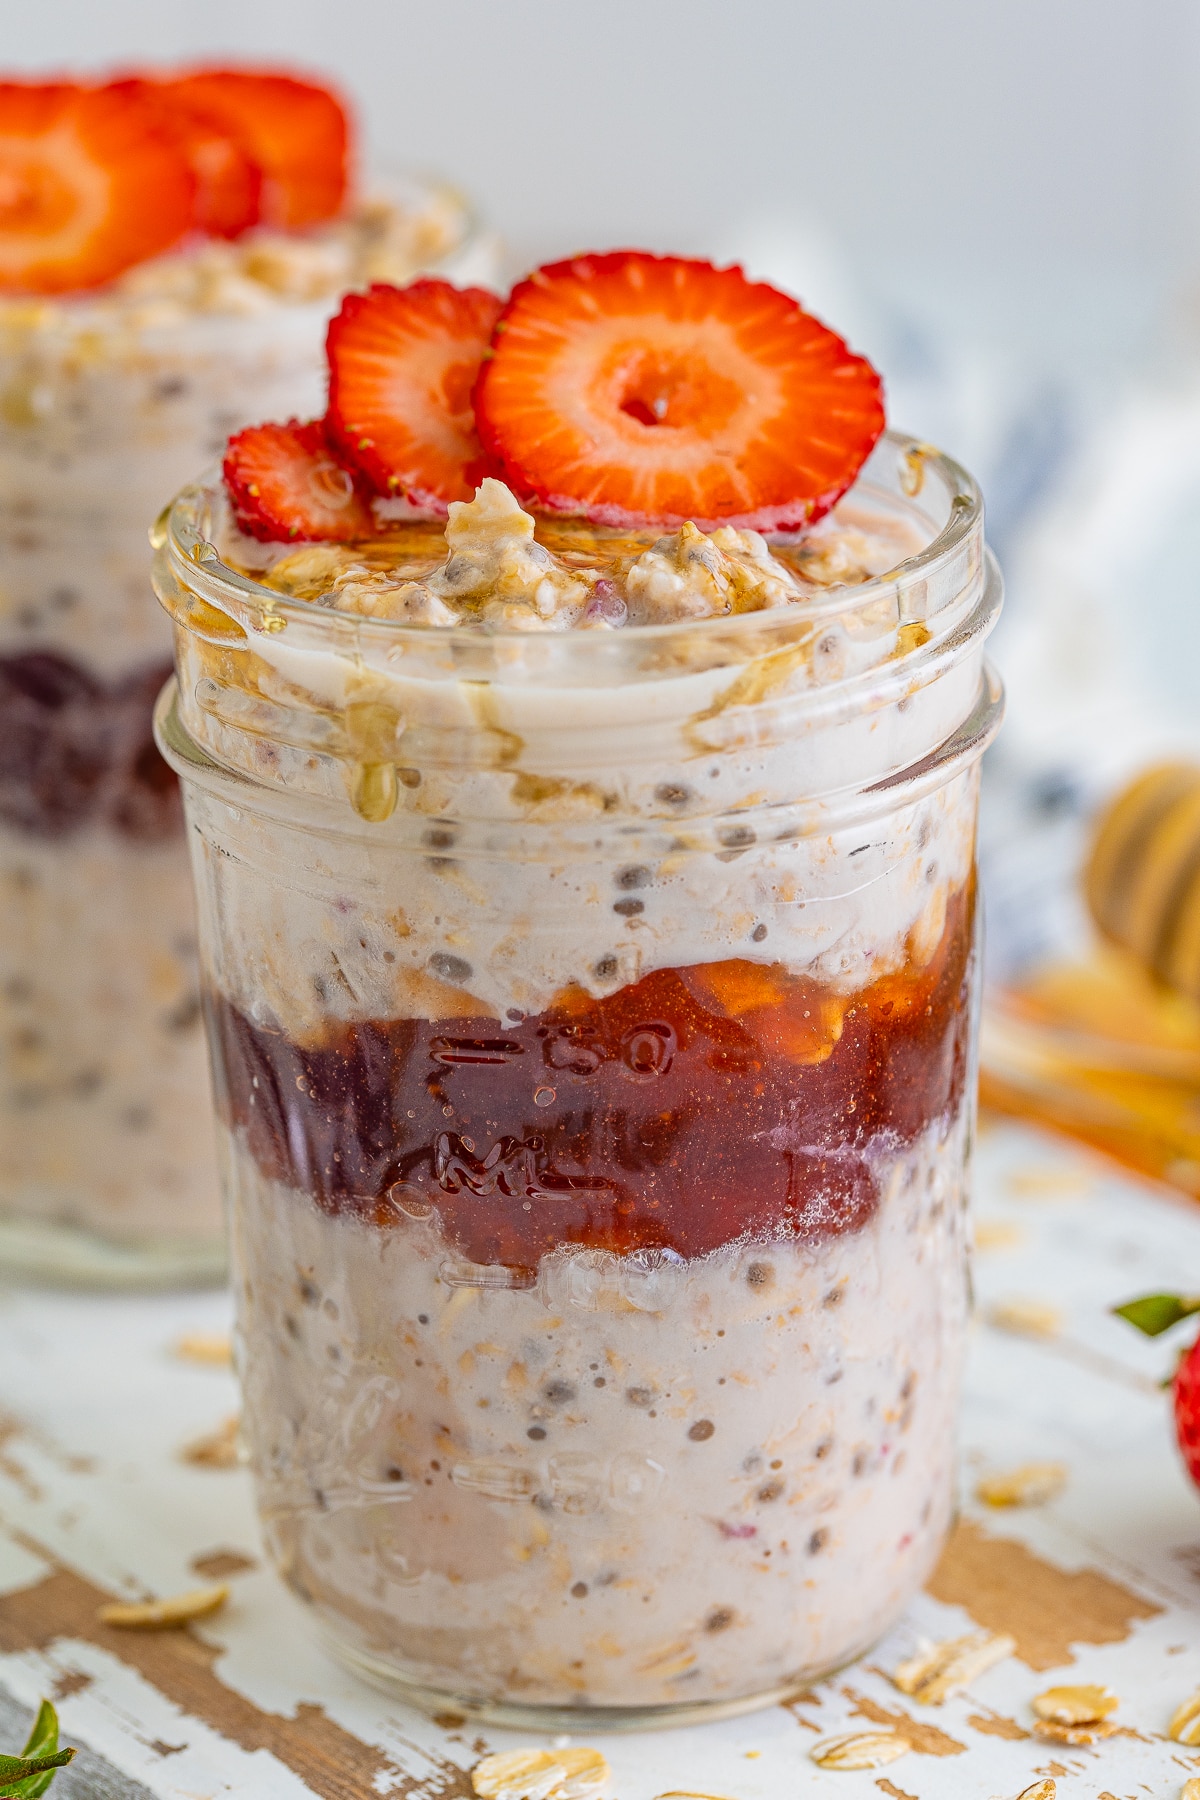 Strawberry Overnight oats shown layered in a mason jar on a white wooden serving platter, striped blue linen, and honey dipper in the background